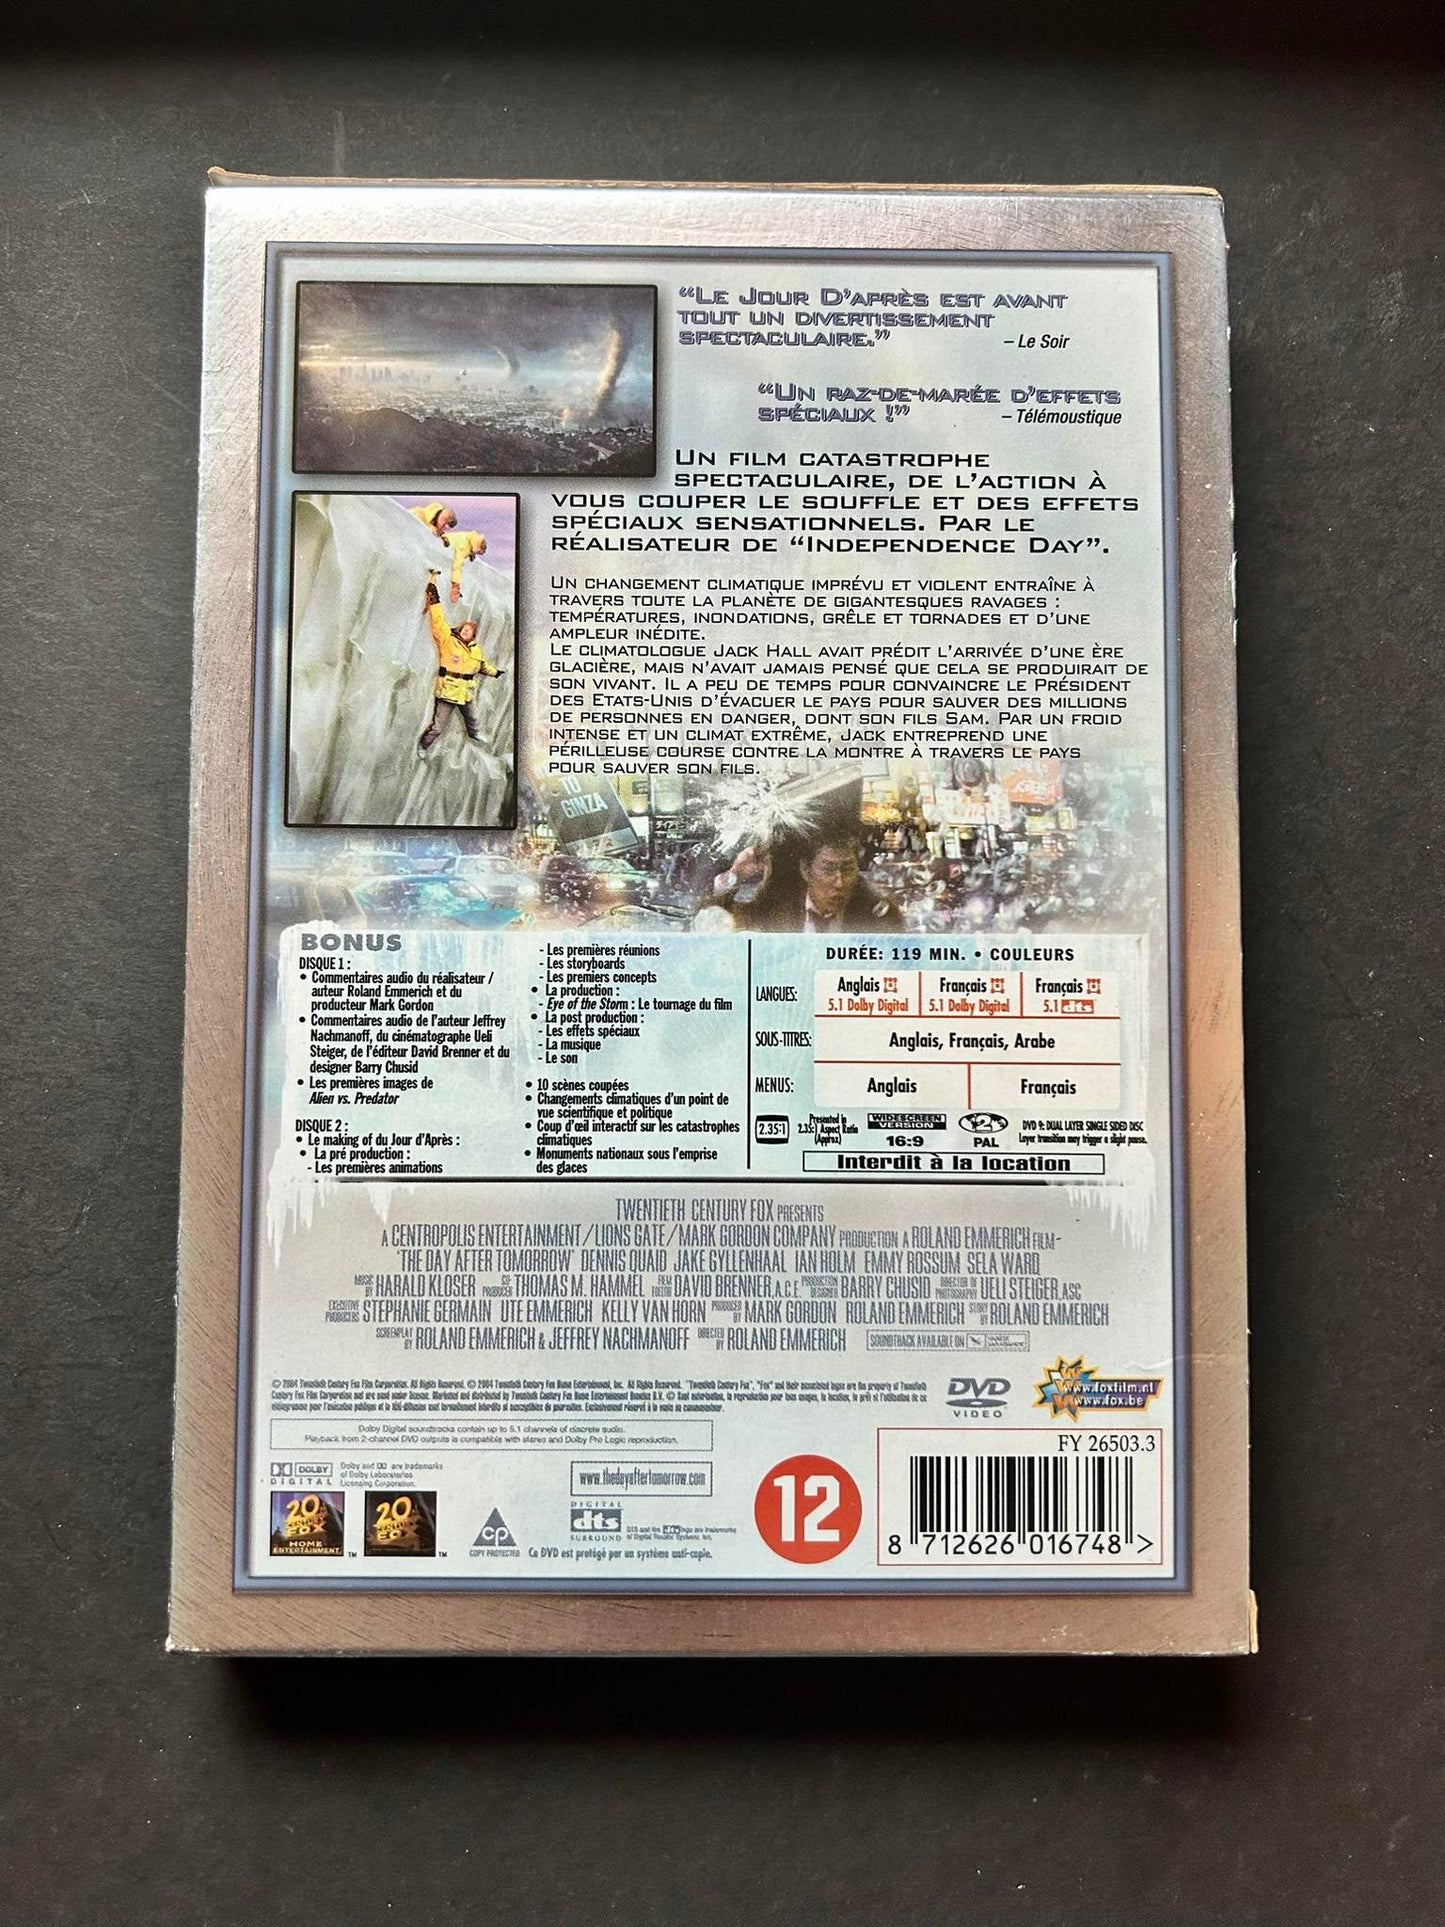 DvD The Day After Tomorrow - Collector's Edition 2 dvd